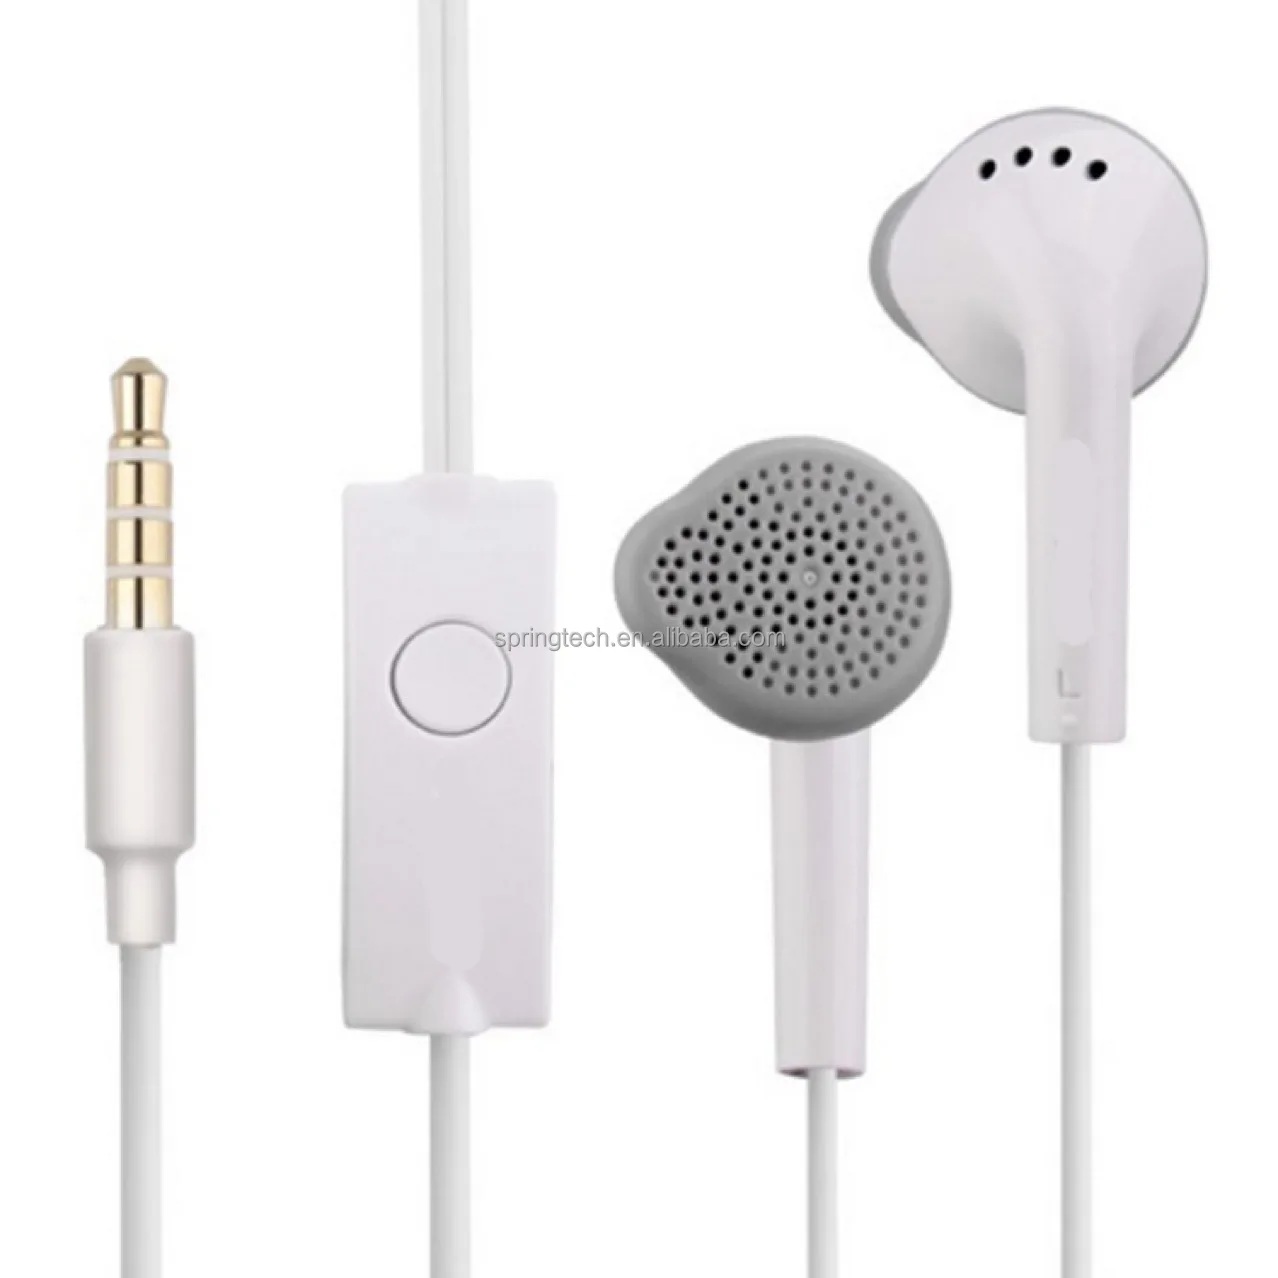 

for samsung S5830 S7562 earphone GT Galaxy Ace original headphone EHS61ASFWE 3.5mm stereo wired headset with microphone